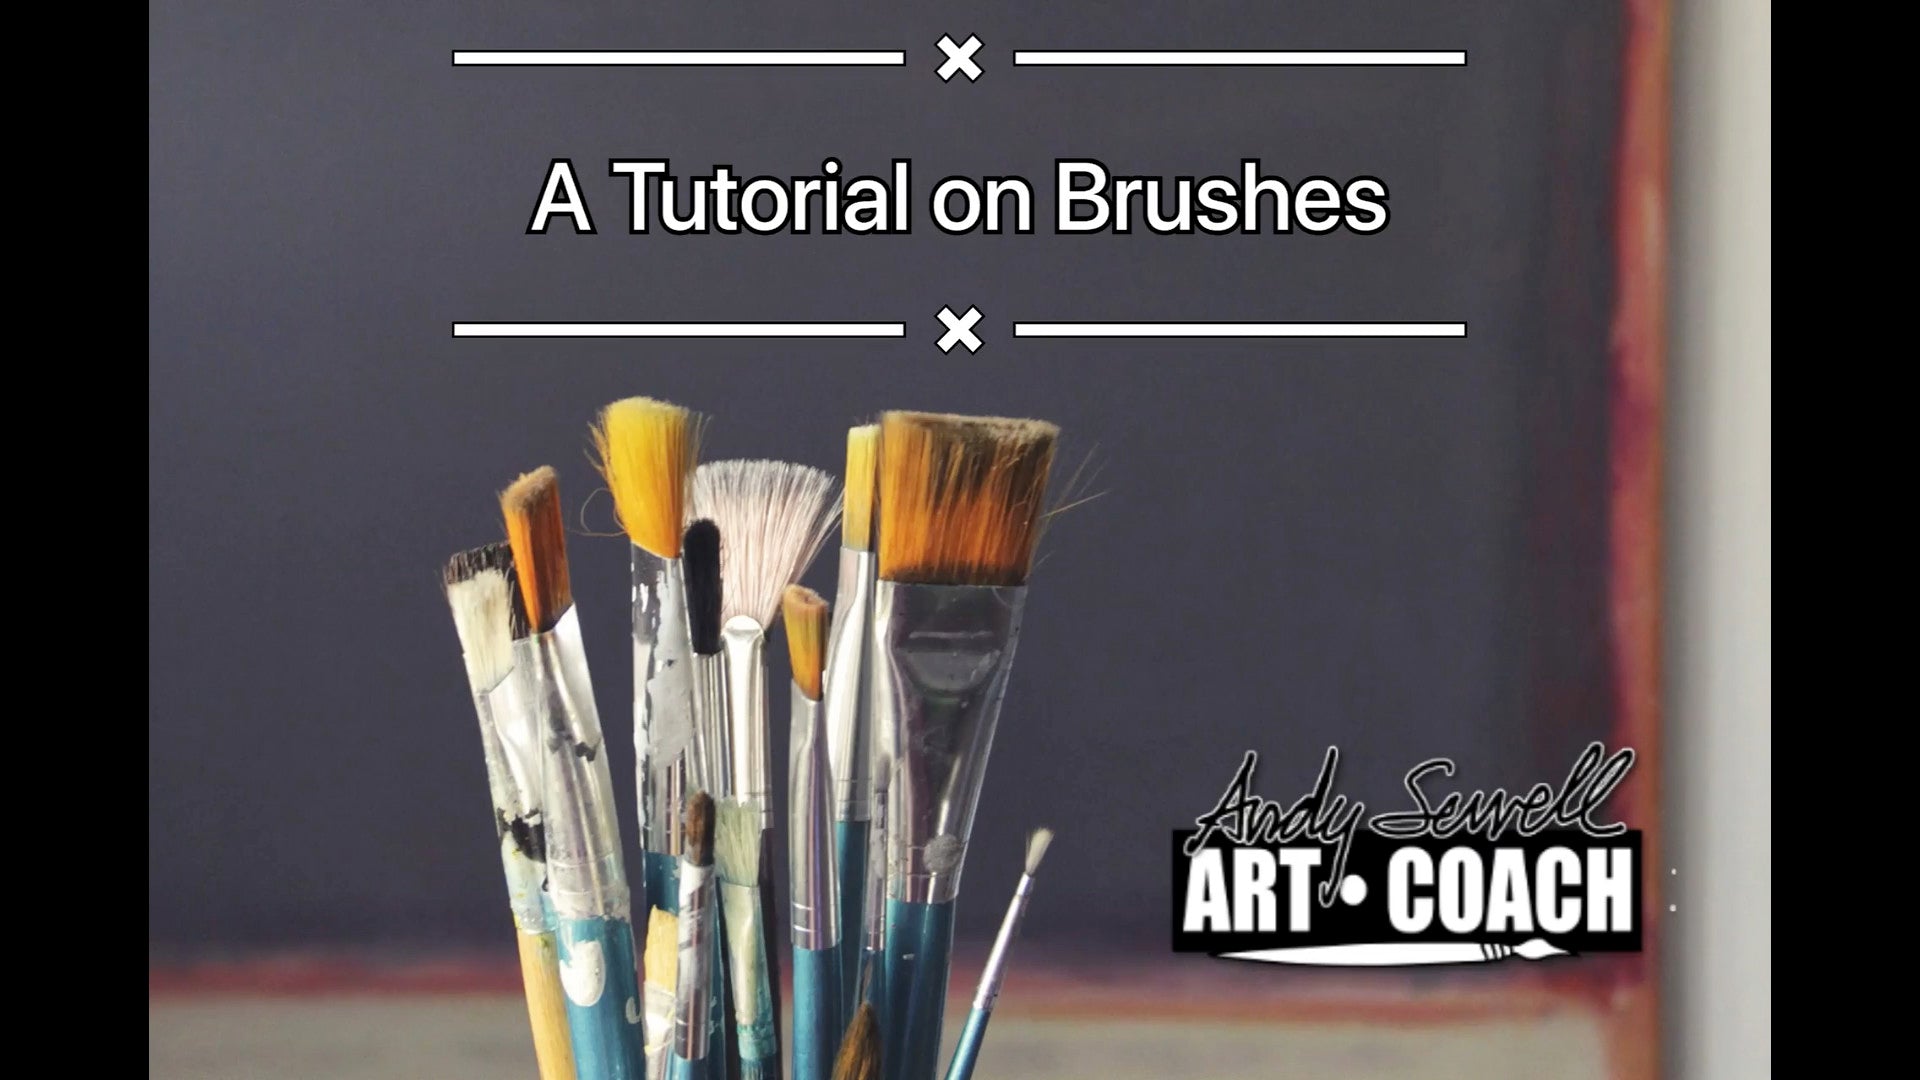 Load video: Click to view brushes tutorial